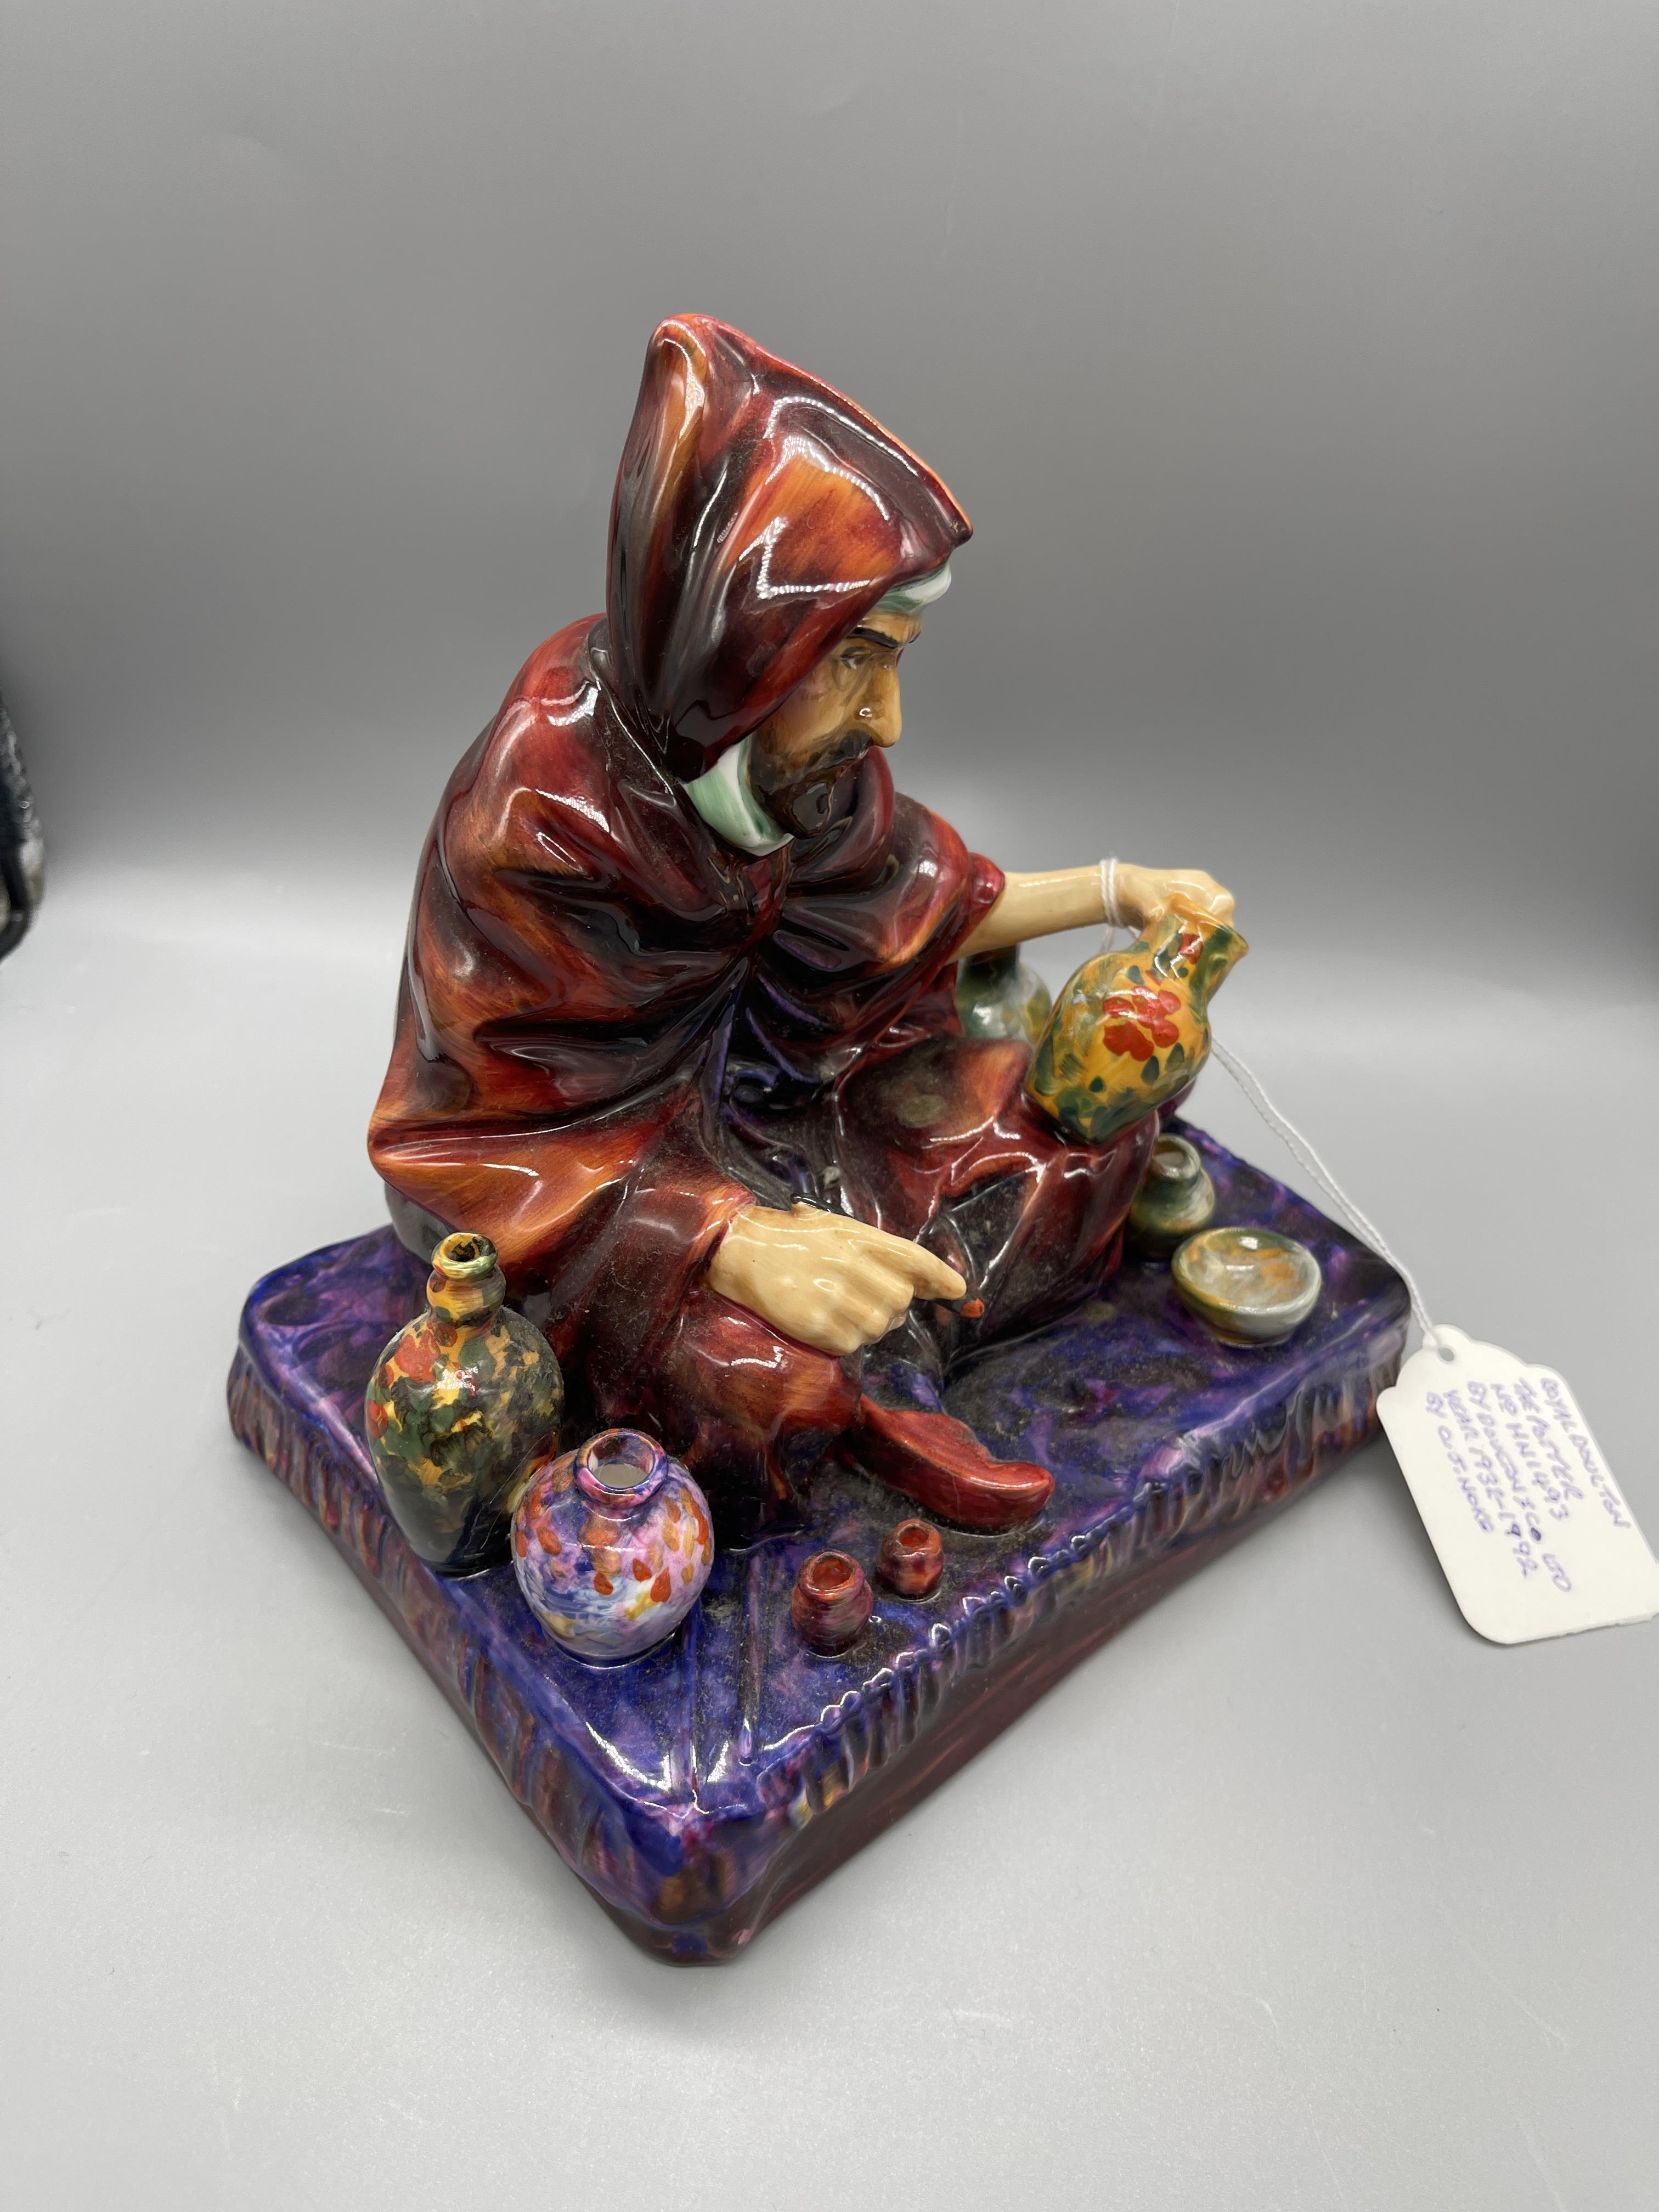 Royal Doulton "The Potter" no: HN1493 Great Condit - Image 3 of 6